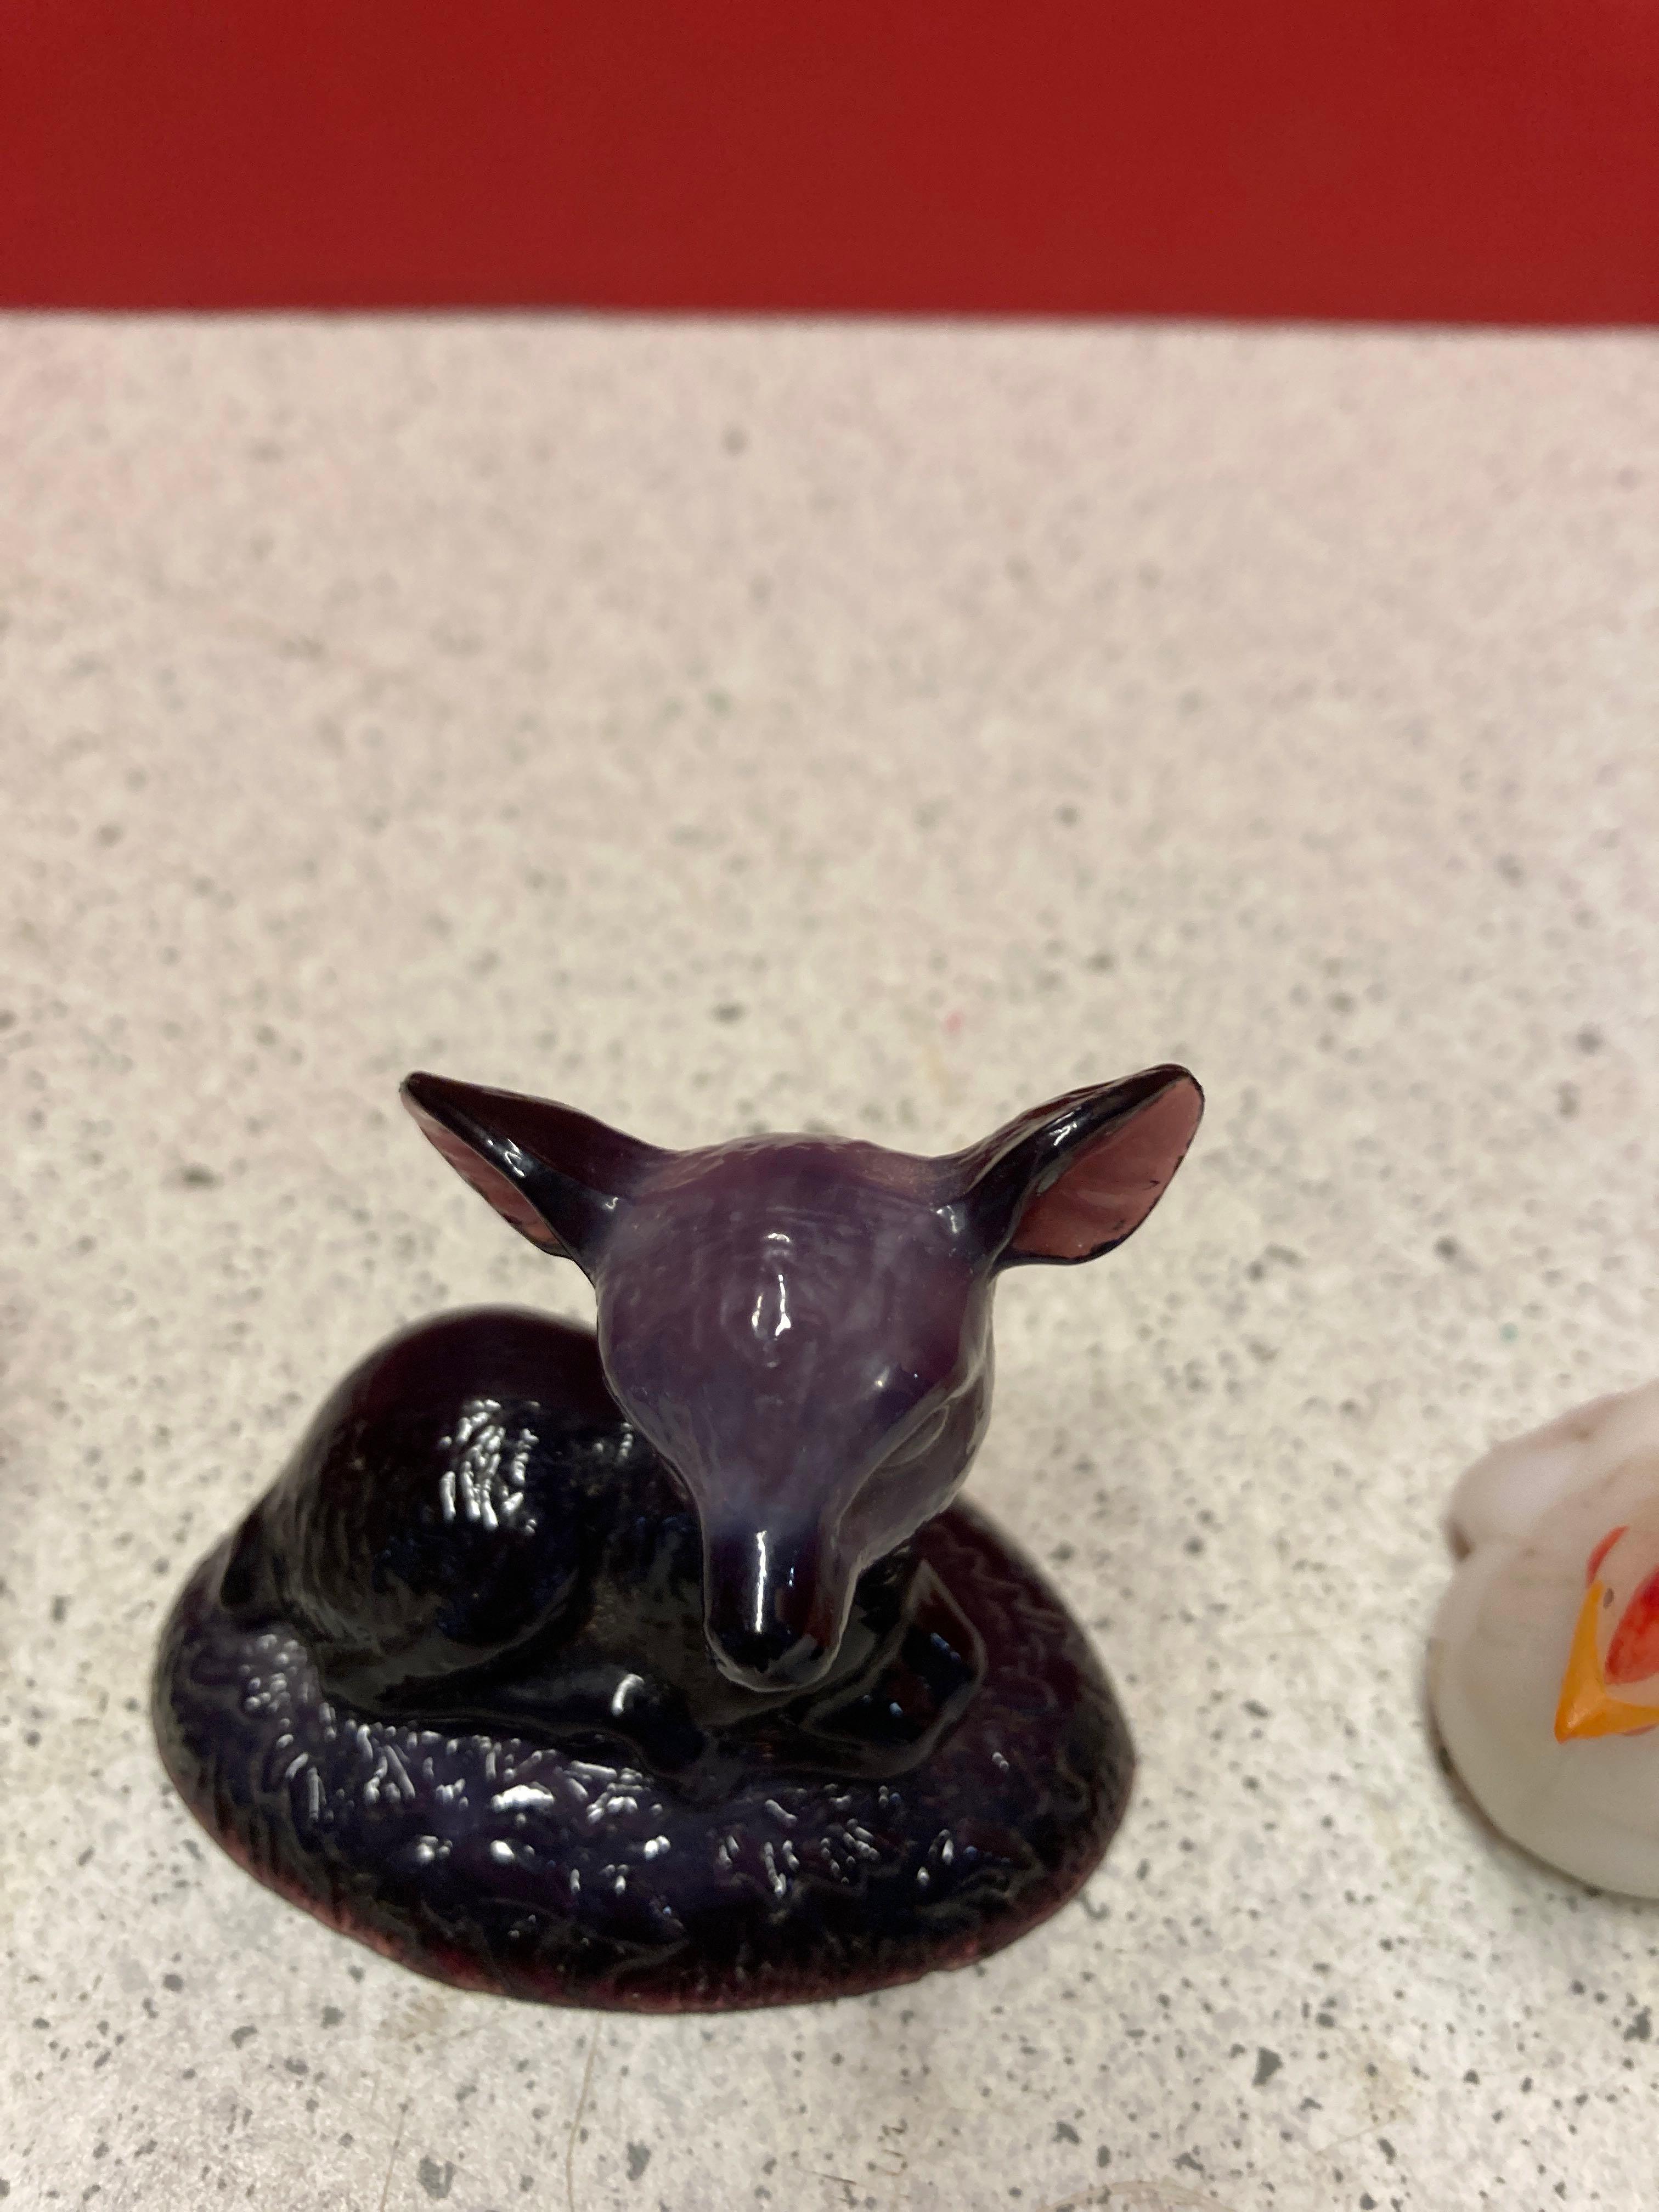 3 Fenton pieces Boyd?s slag glass deer Westmoreland candy container